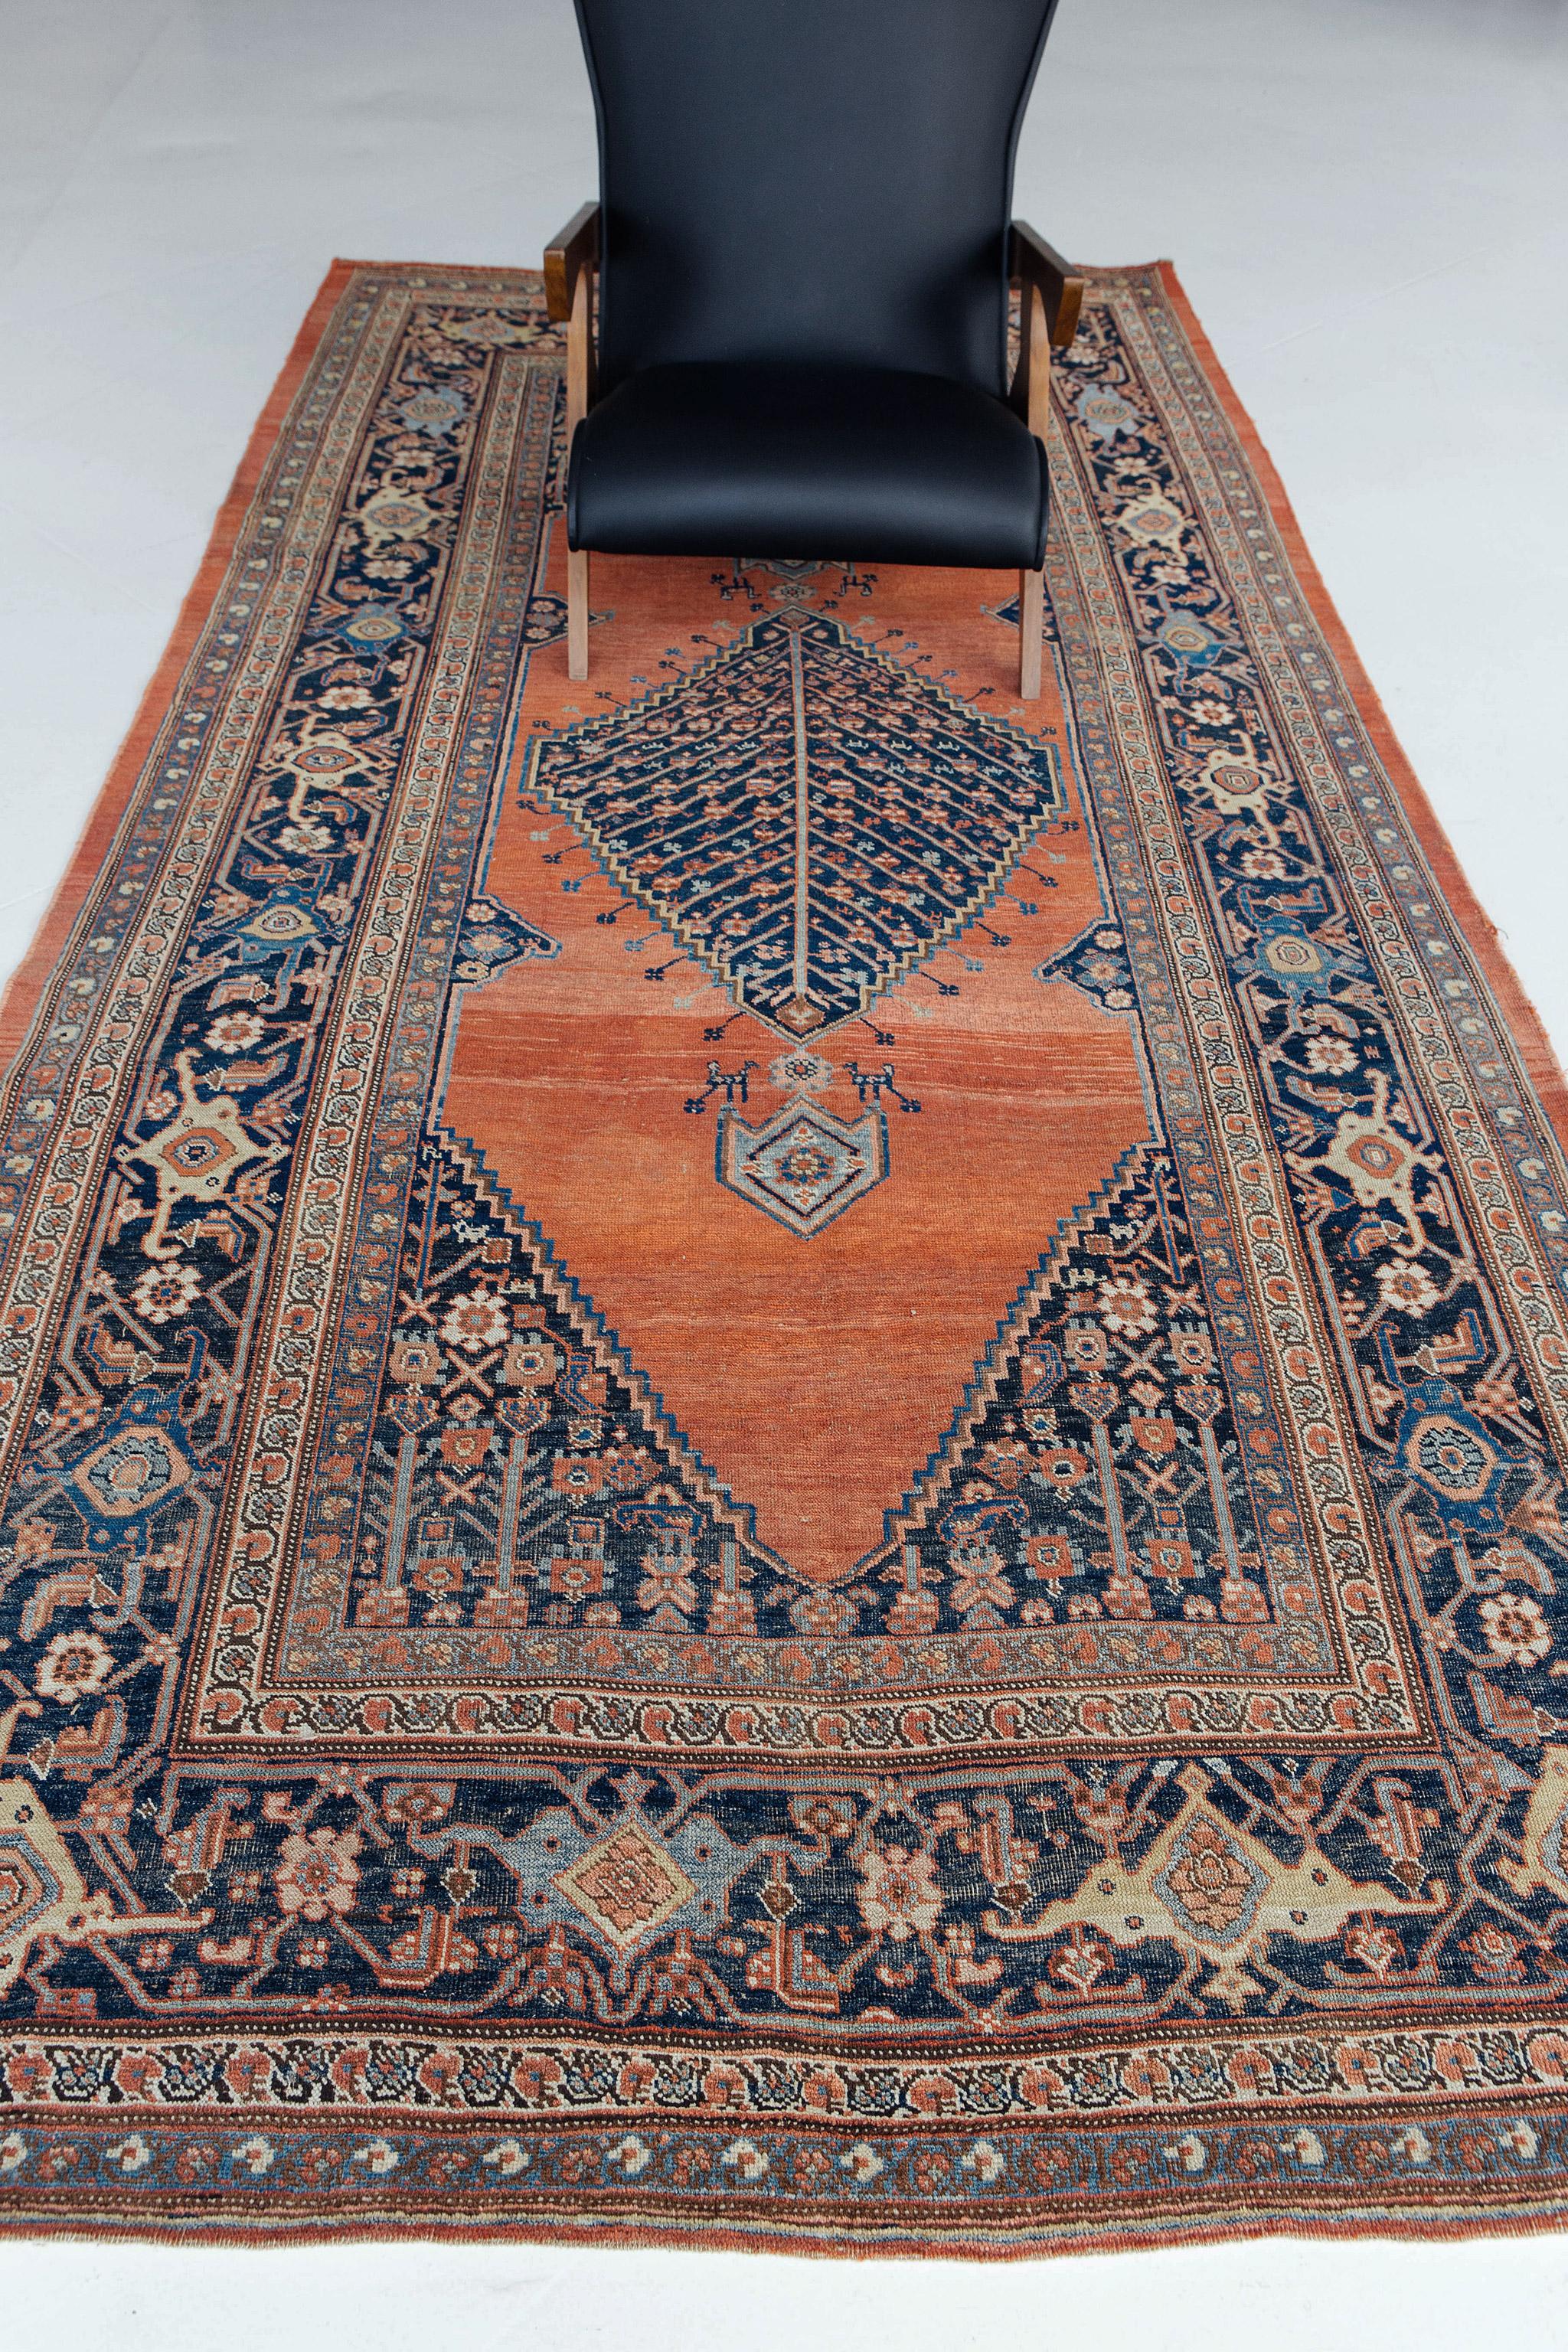 Persian Bidjar rugs are unique for their angular motifs, appearing almost like Caucasian rugs in their choice of color and arrangement. In this magnificent Persian runner rug, the arrangement is designed to cascade down in the traditional runner